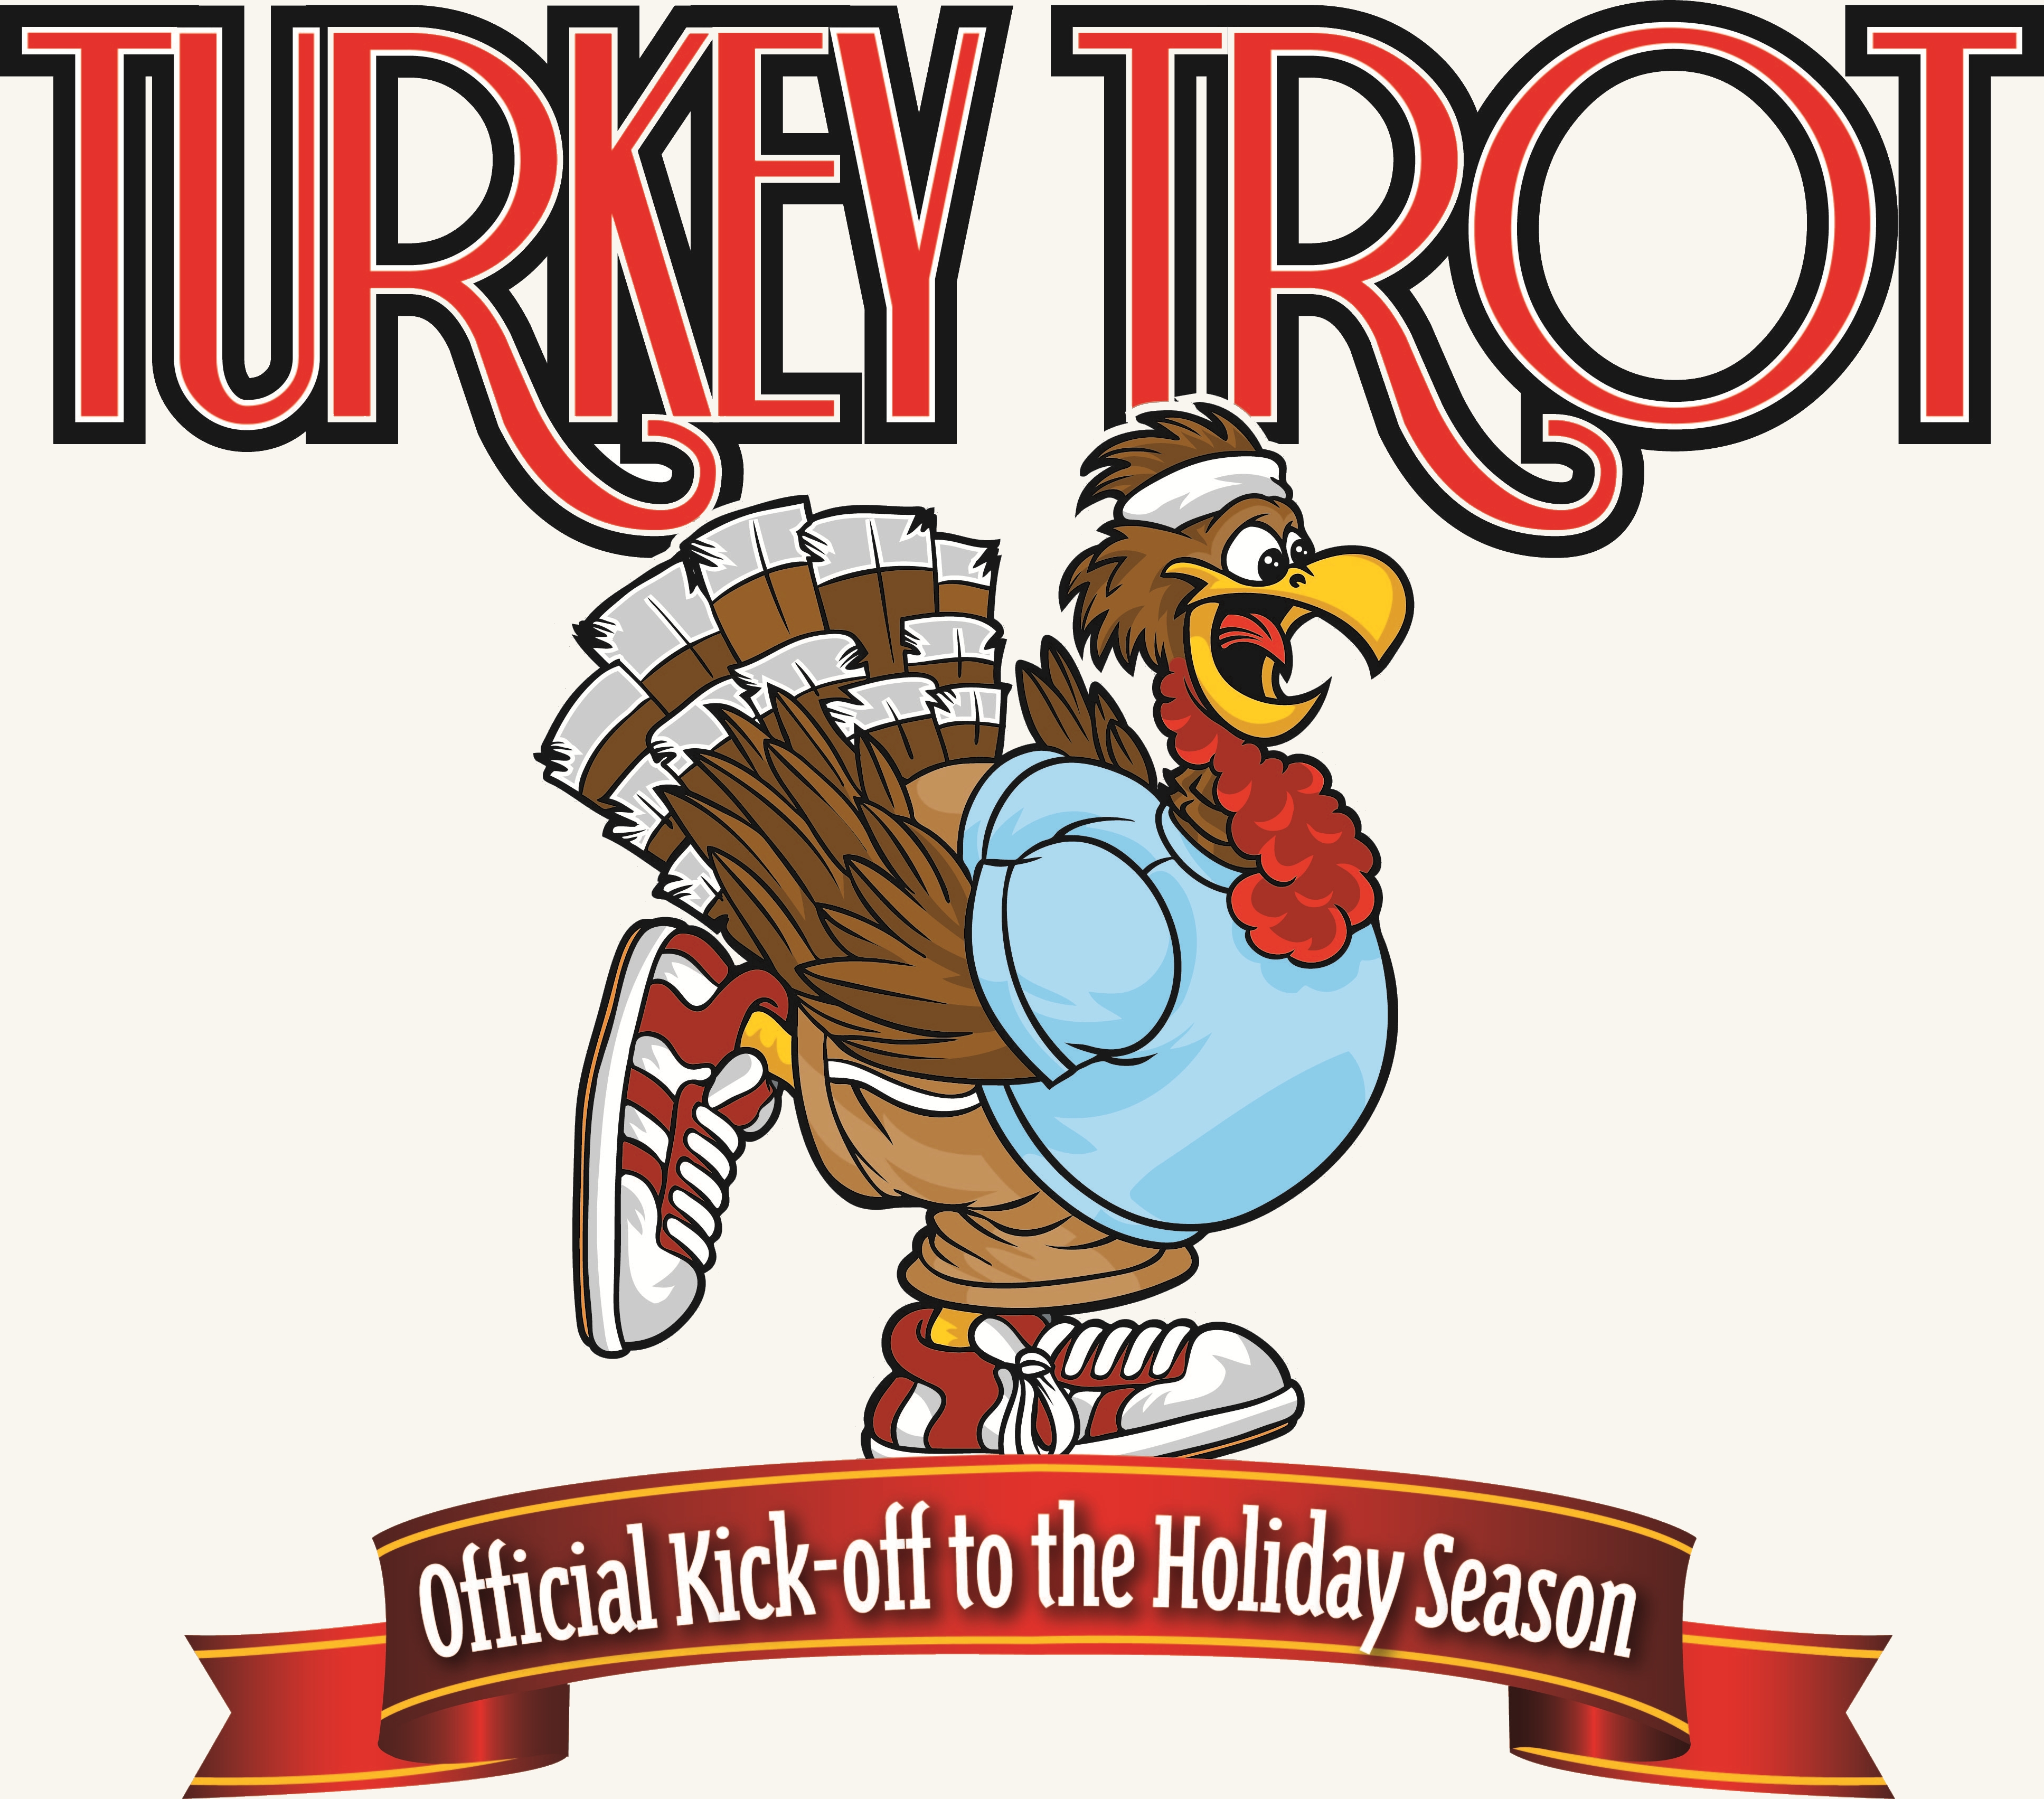 Running Turkey Trot   Clipart Panda   Free Clipart Images